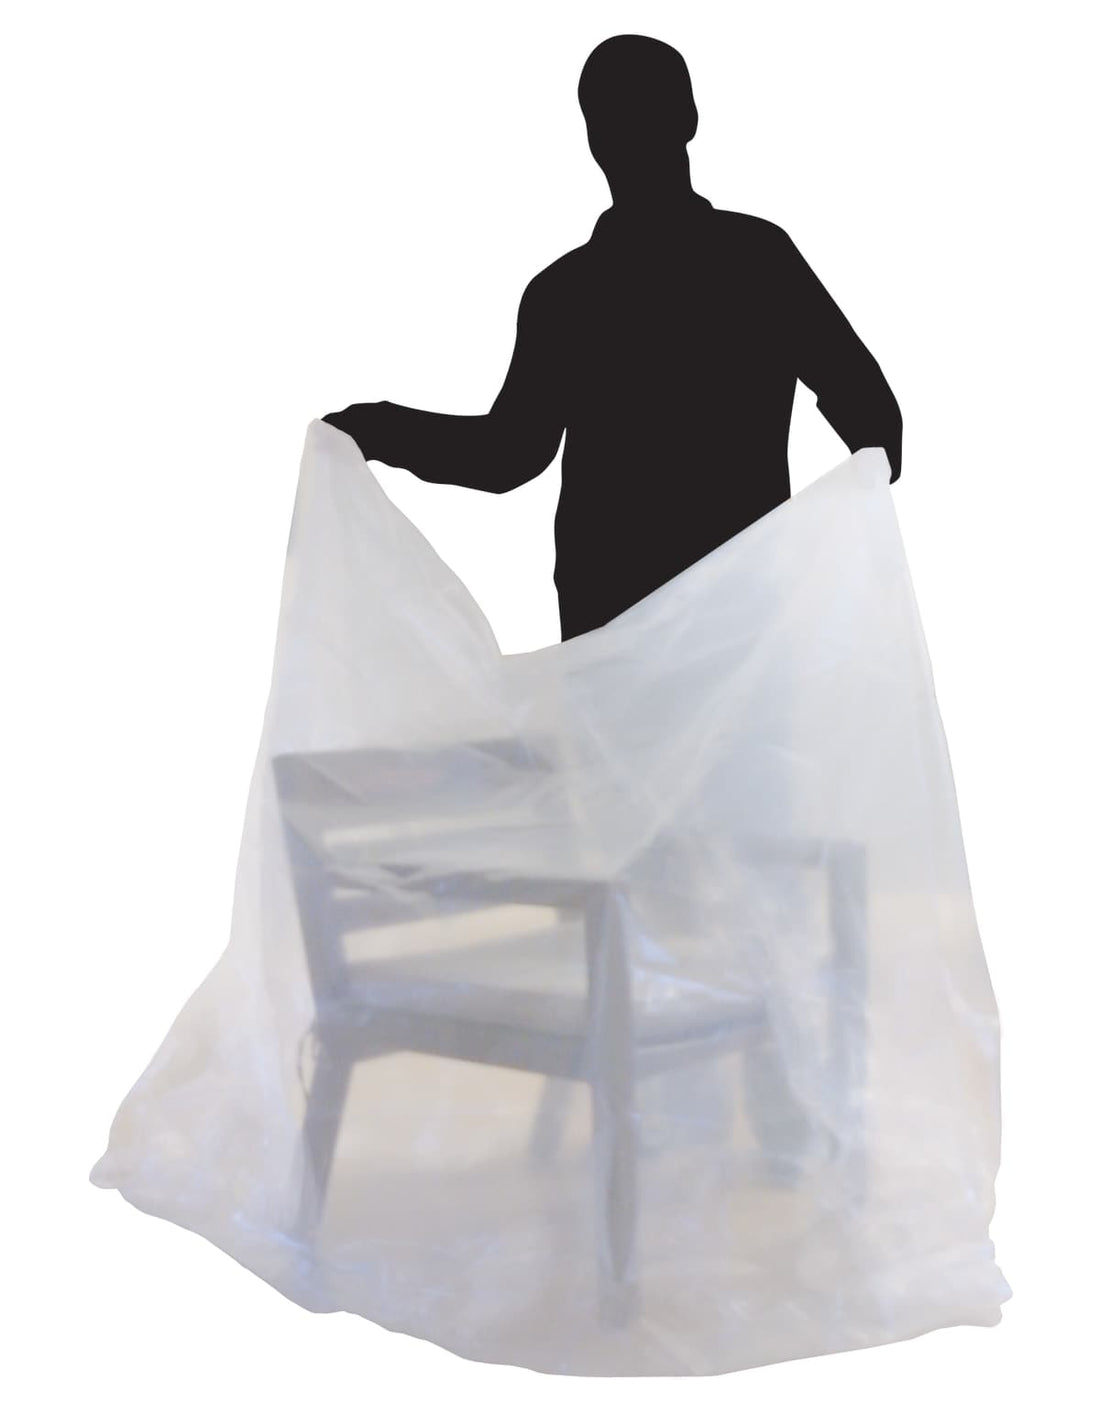 POLYPROPYLENE TRANSPARENT POLYPROPYLENE PROTECTION COVER FOR CHAIR OR CHAIR L130xD110CM